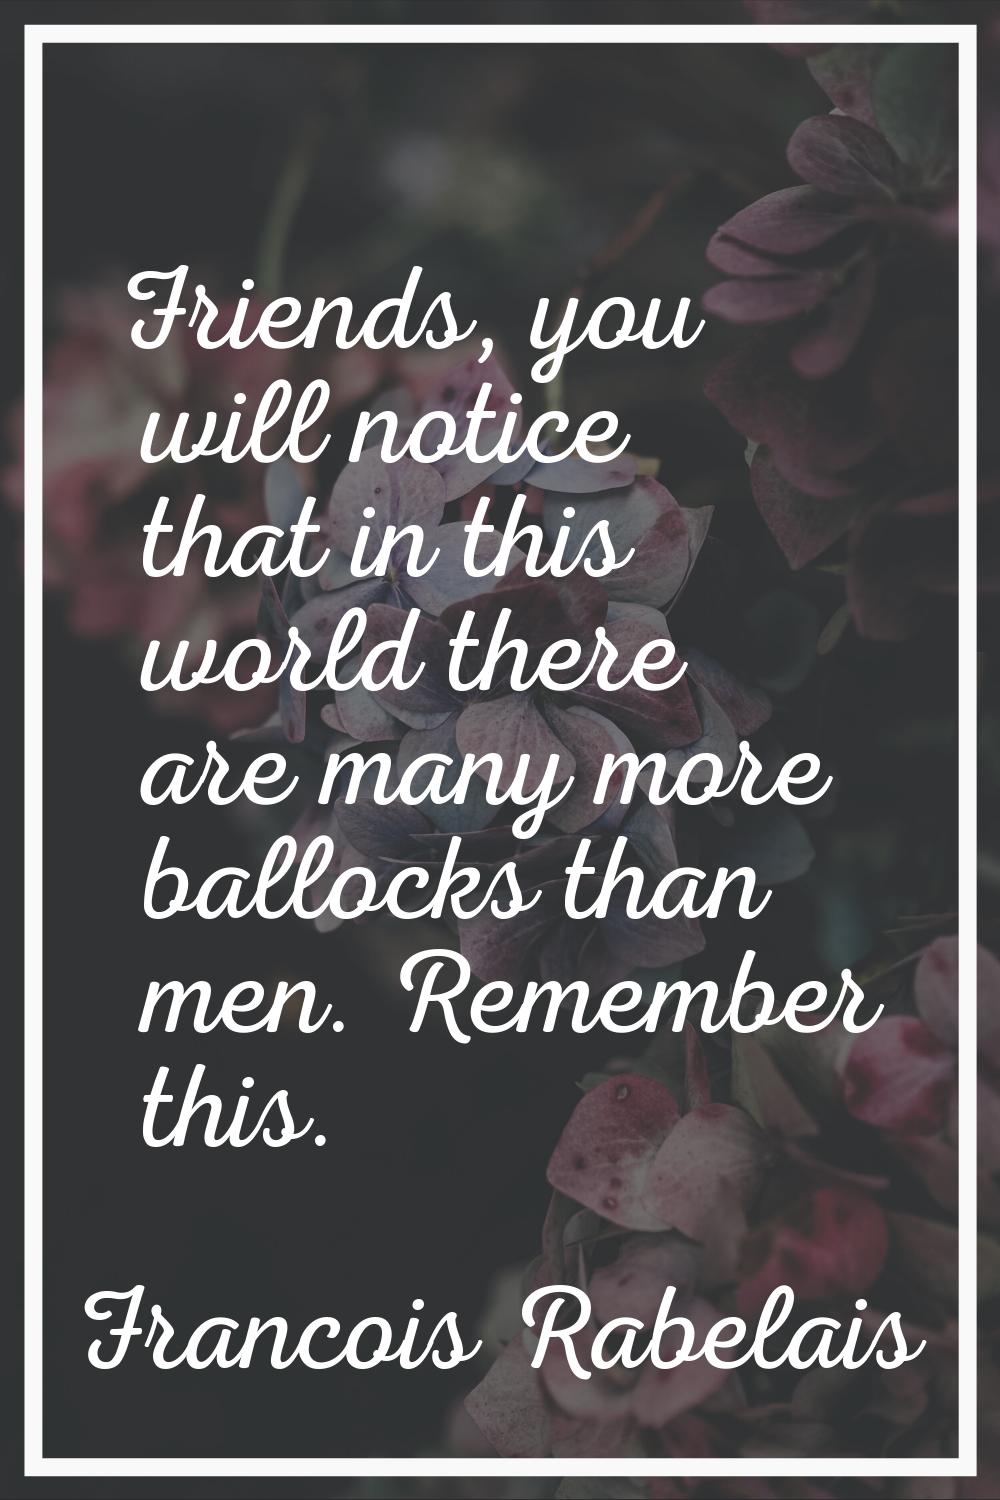 Friends, you will notice that in this world there are many more ballocks than men. Remember this.